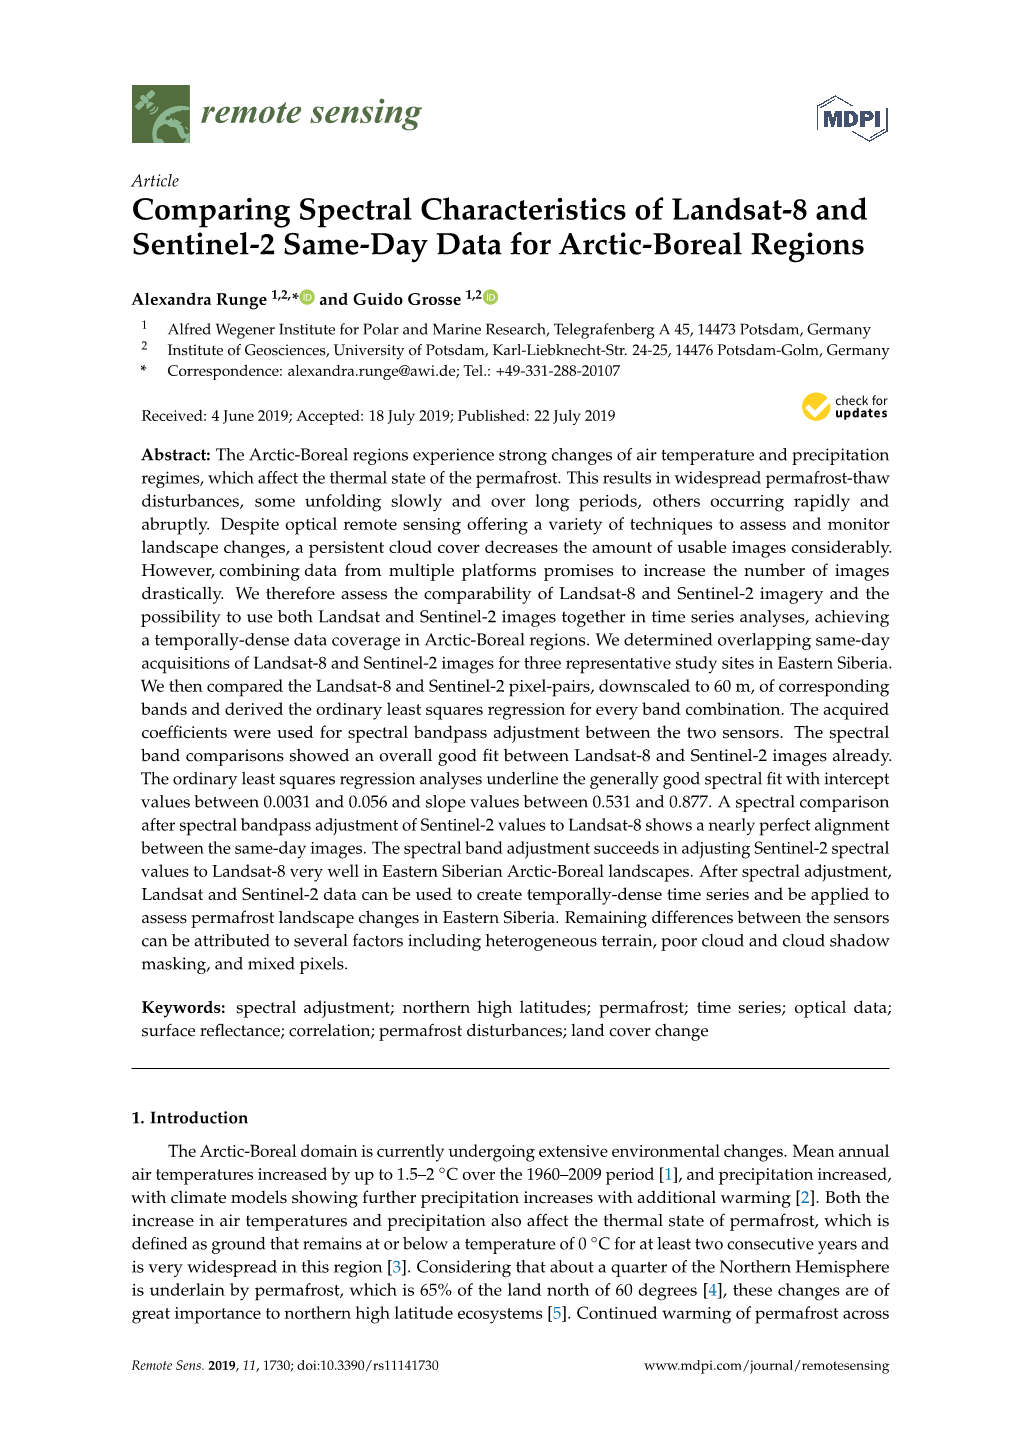 Comparing Spectral Characteristics of Landsat-8 and Sentinel-2 Same-Day Data for Arctic-Boreal Regions